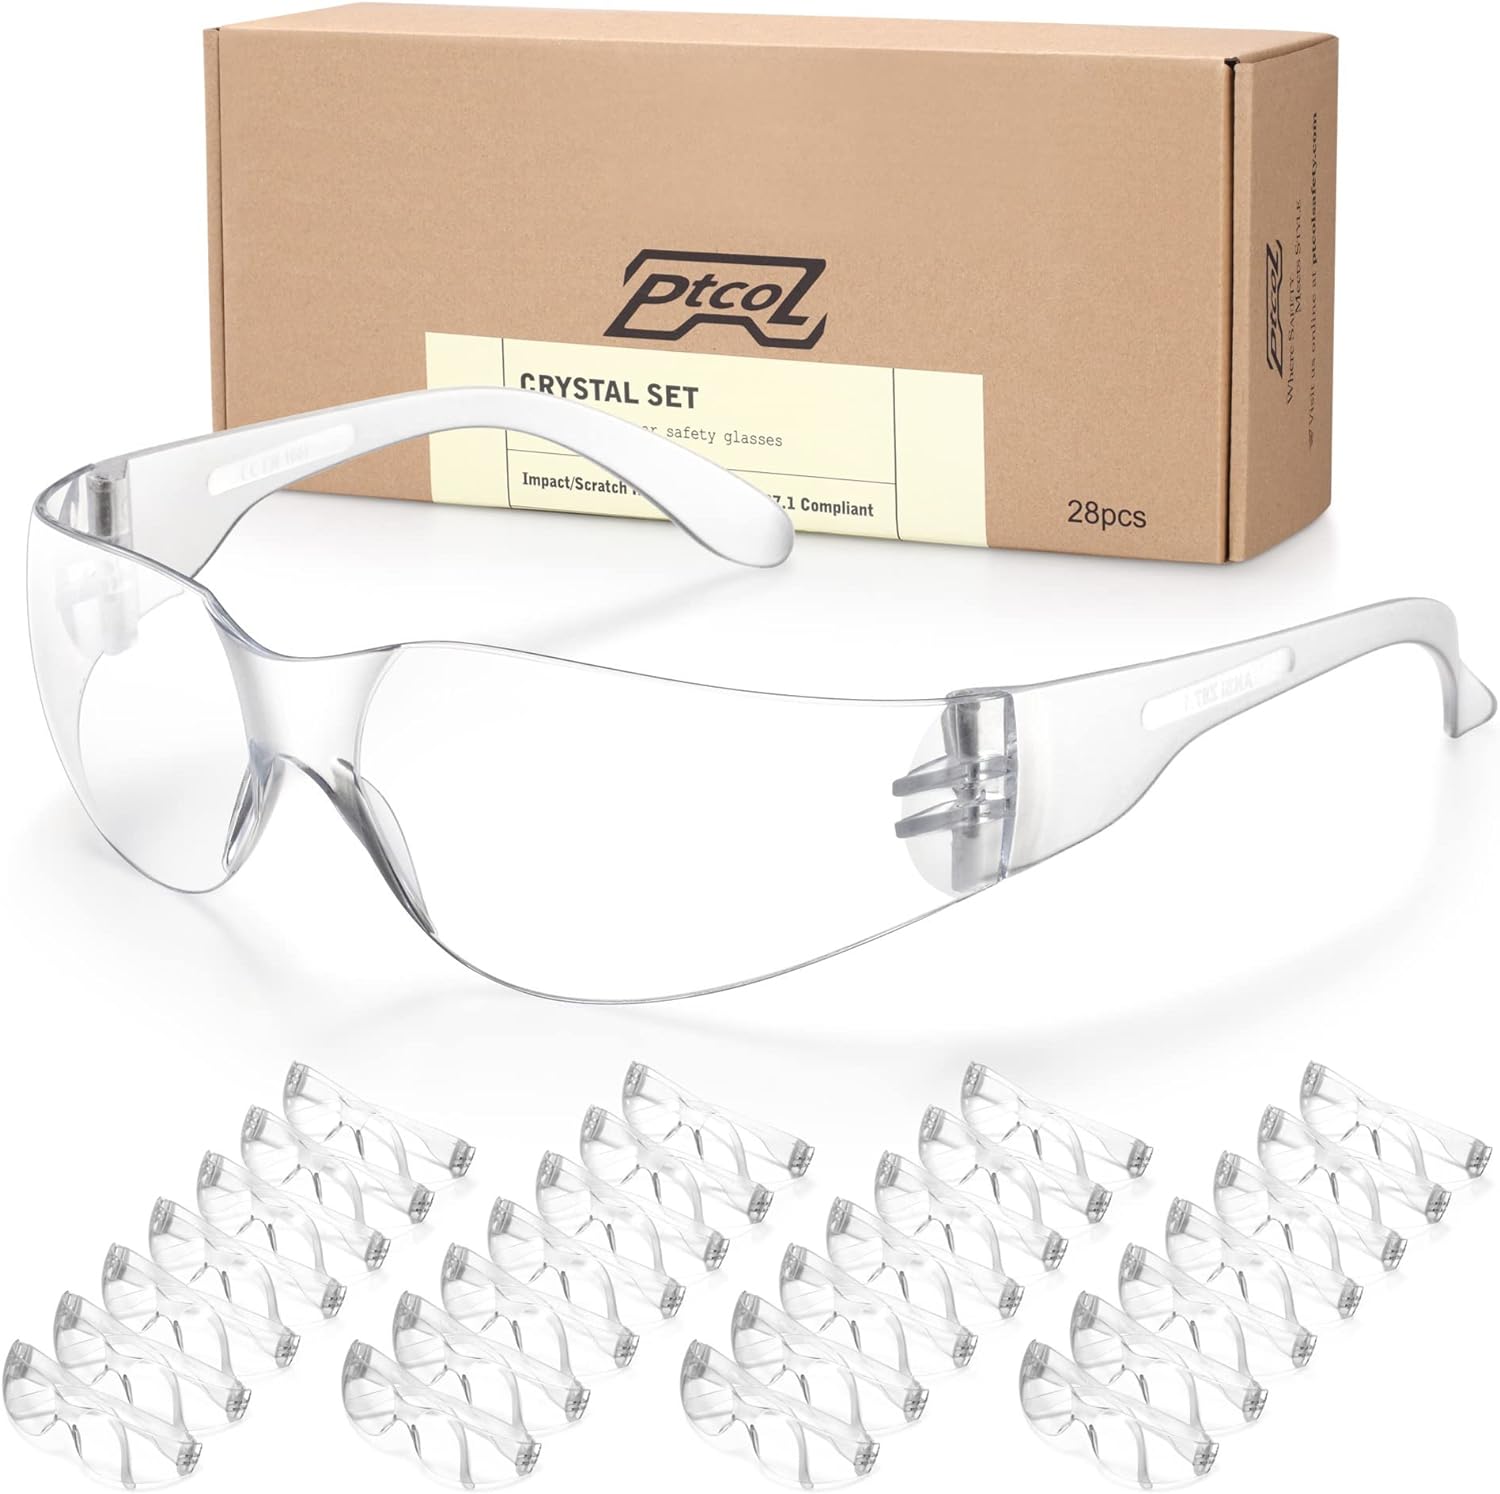 Z87 Safety Glasses: Protecting in Hazardous Environments插图2